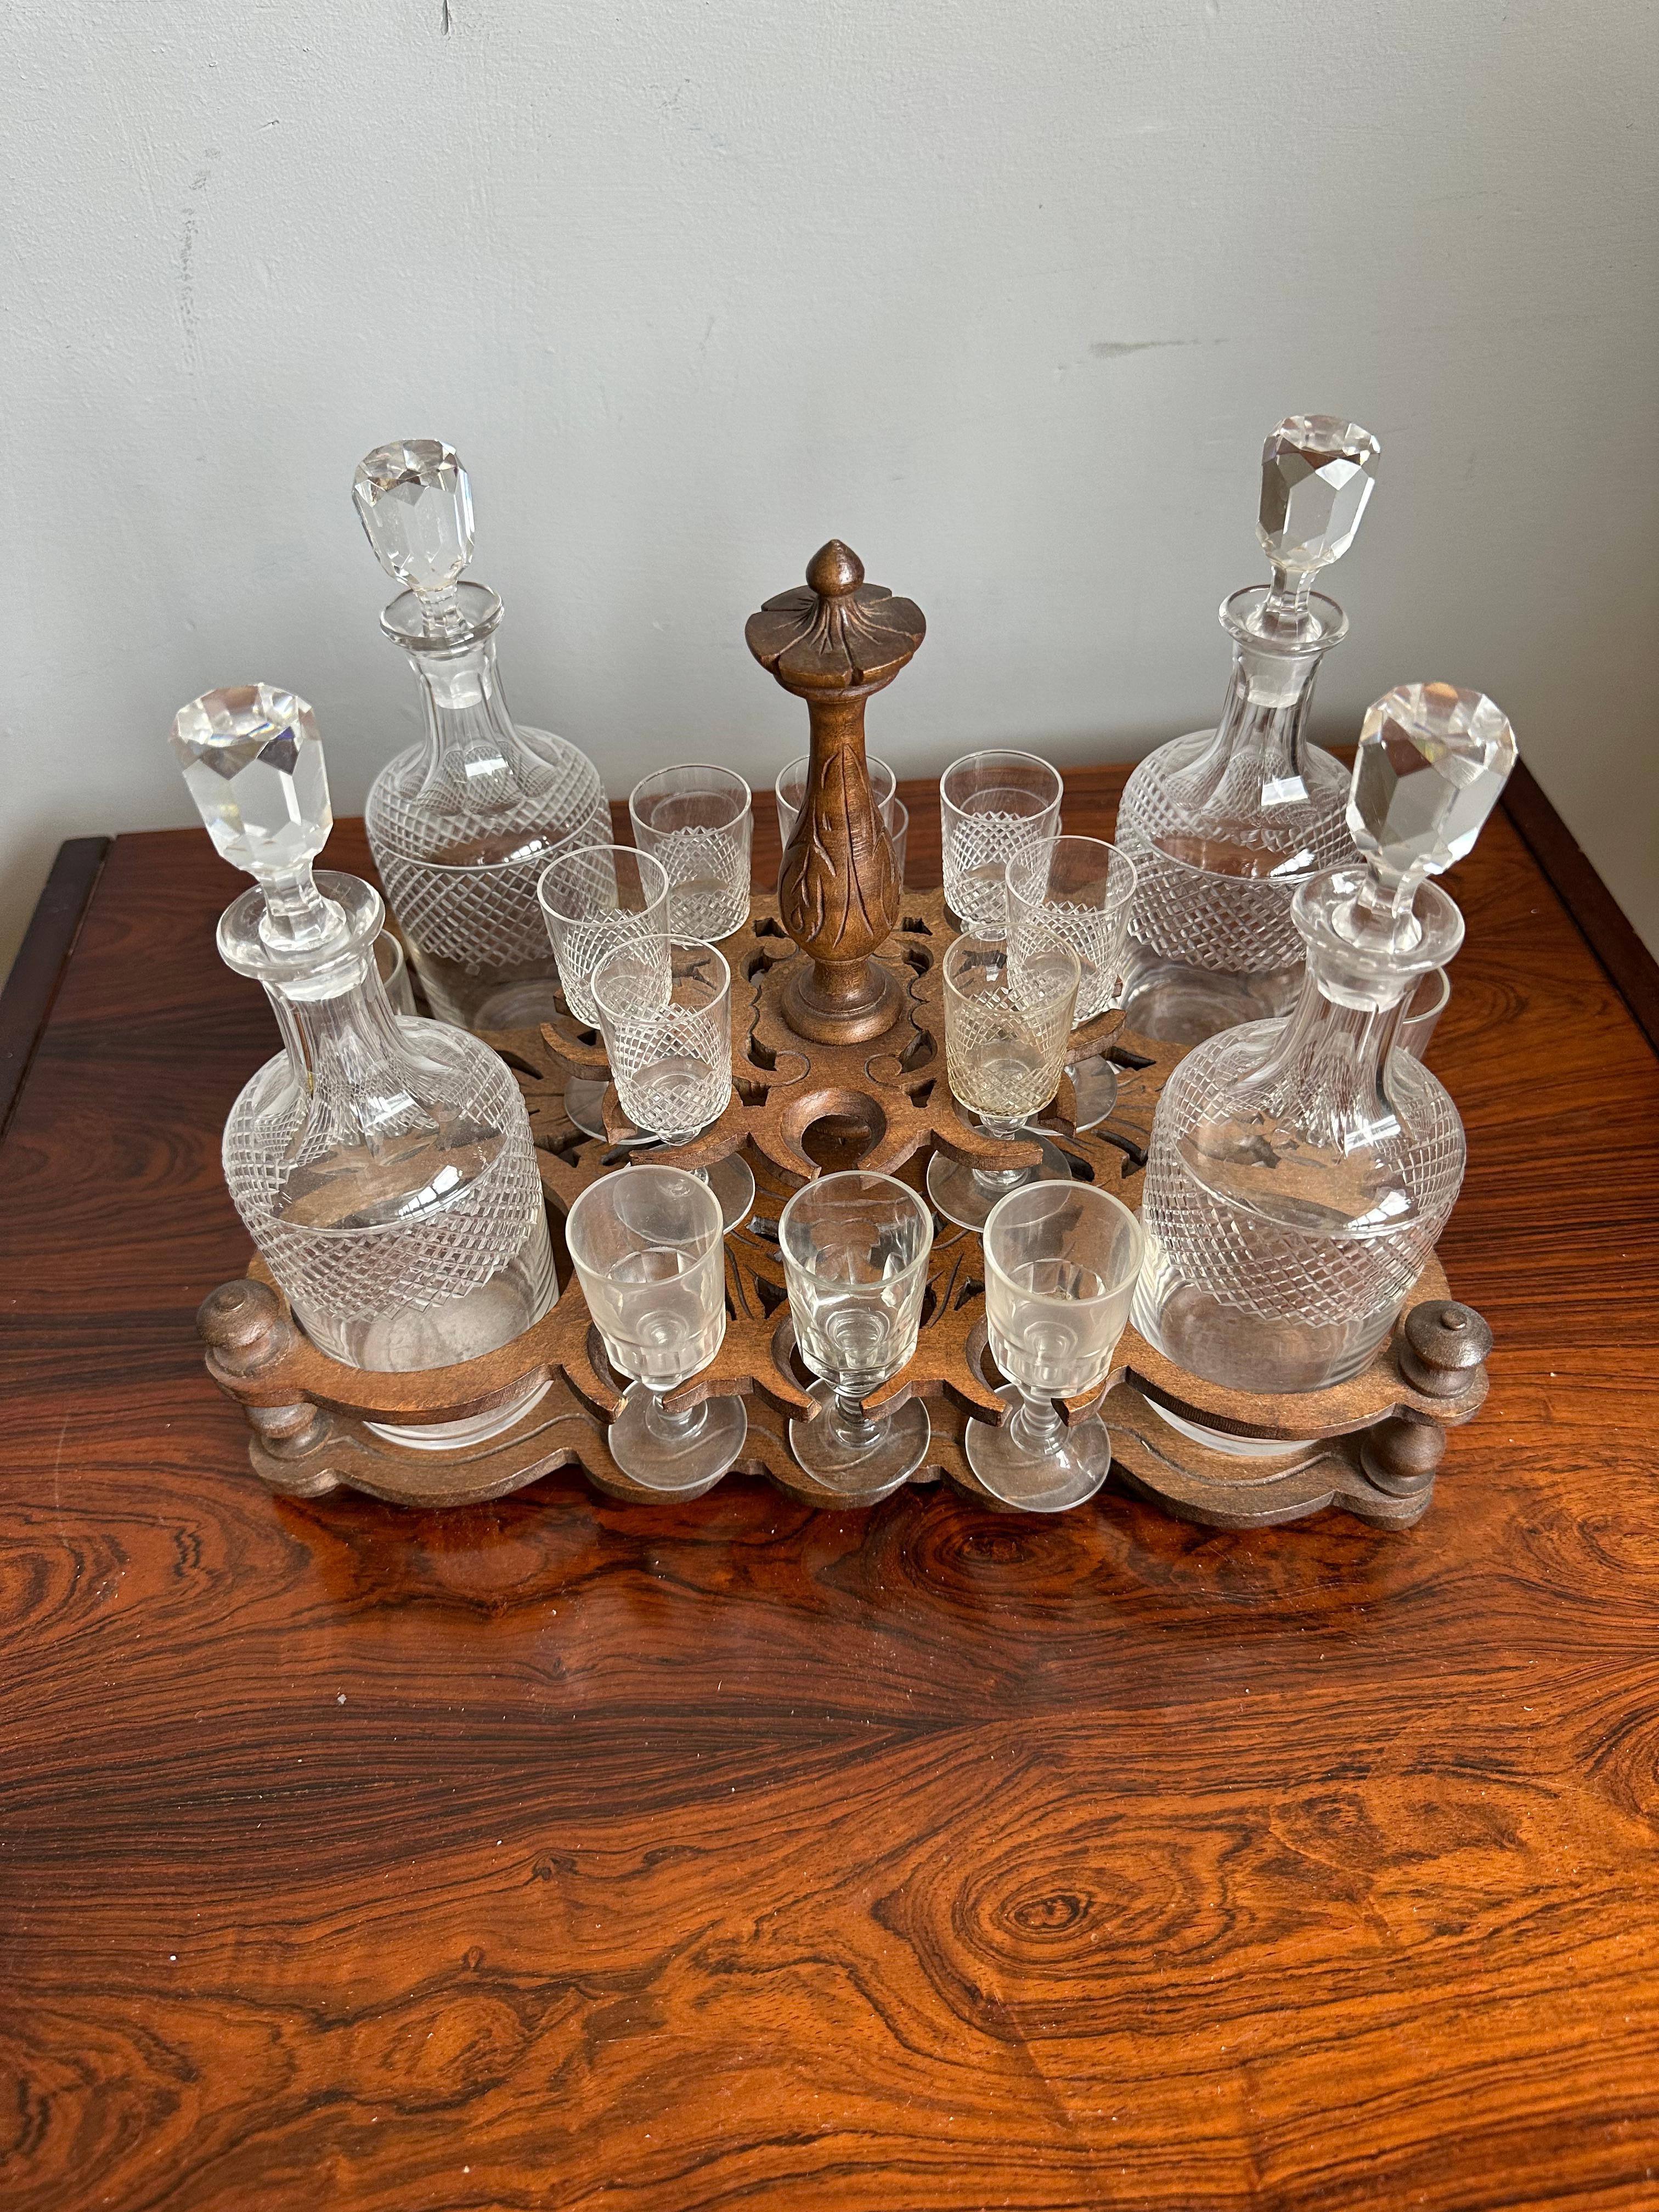 19th Century Victorian Era Black Forest Liquor Tantalus with Glasses & Decanters For Sale 9